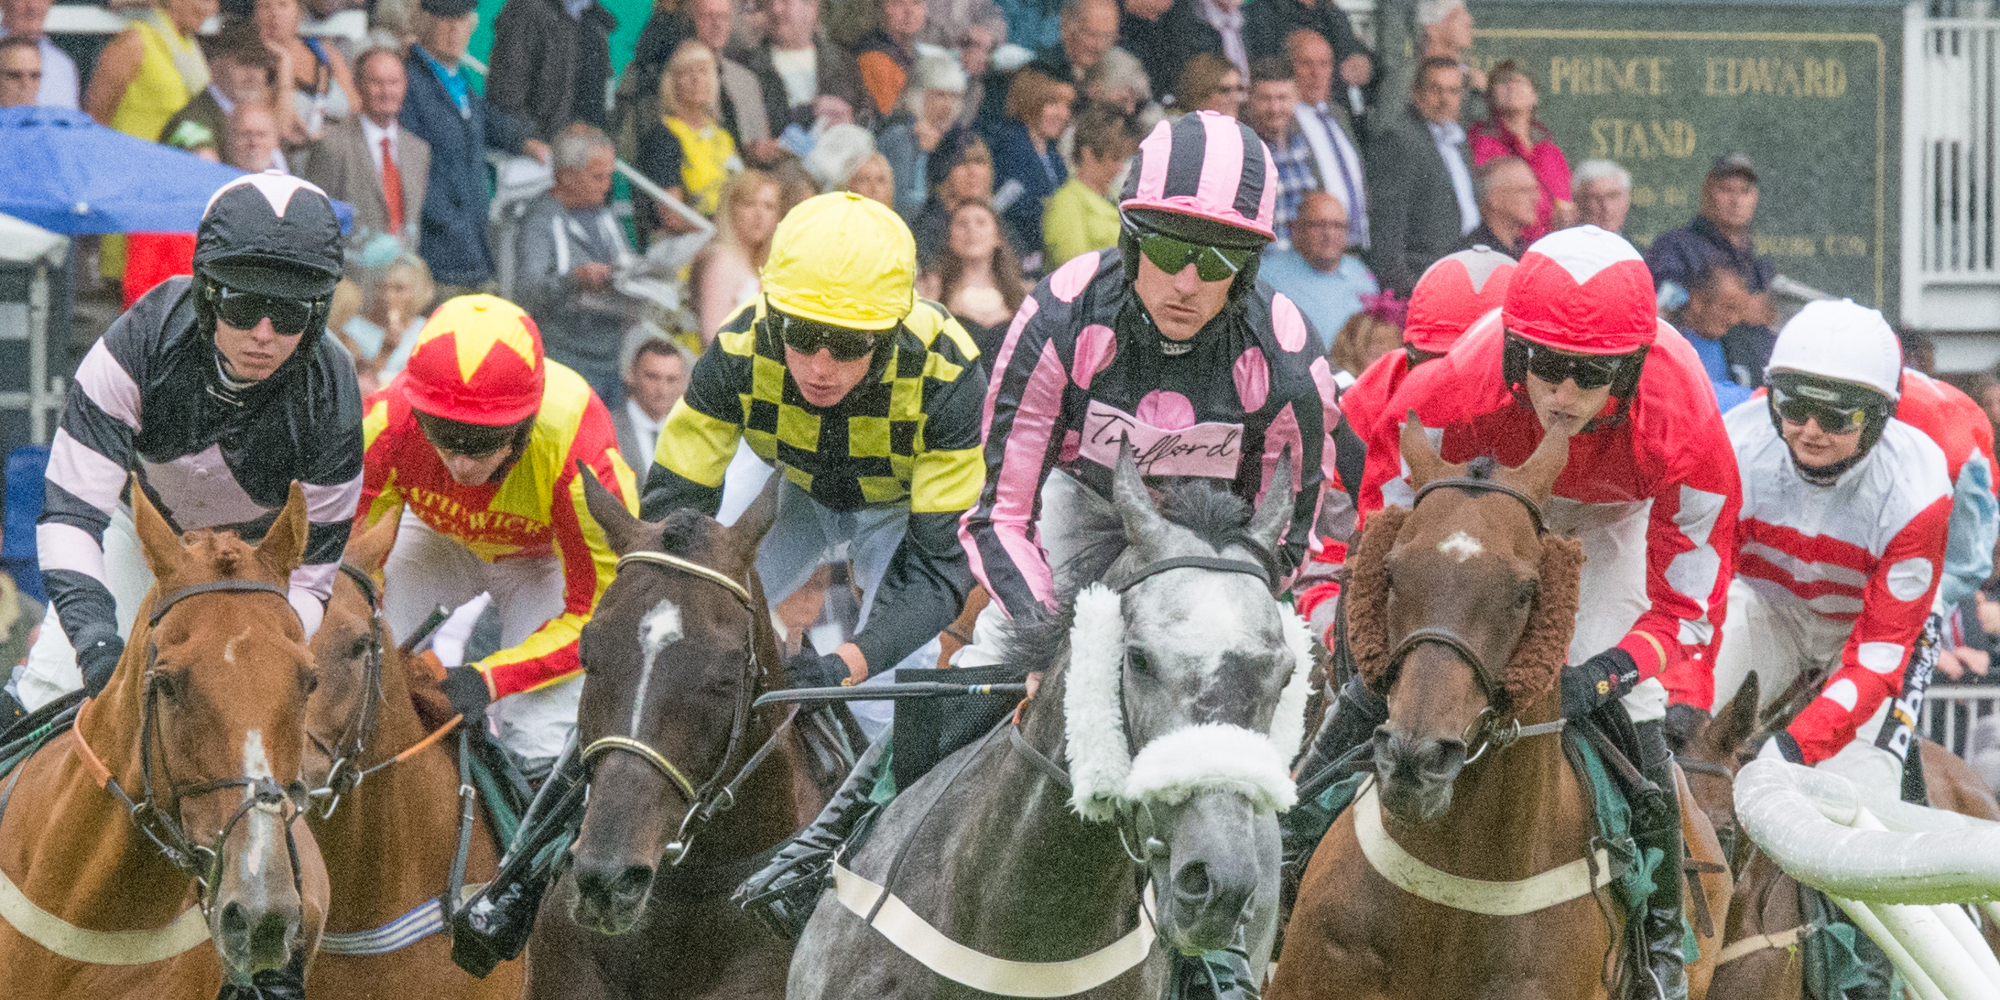 Uttoxeter Racecourse - Wednesday 15th June